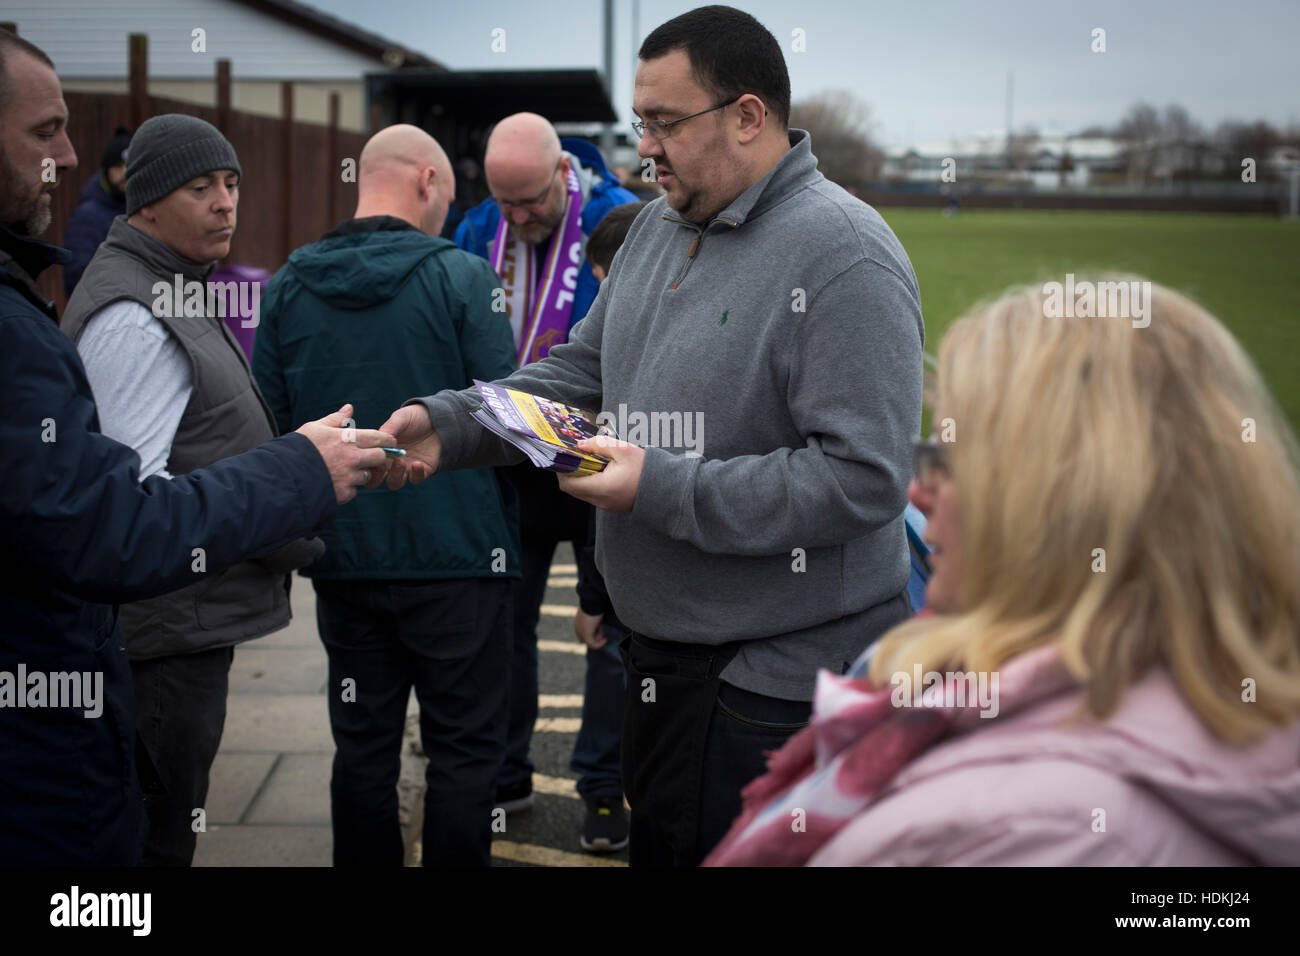 A spectator buying a match programme at the Delta Taxis Stadium, Bootle, Merseyside before City of Liverpool hosted Holker Old Boys in a North West Counties League division one match. Founded in 2015, and aiming to be the premier non-League club in Liverpool, City were admitted to the League at the start of the 2016-17 season and were using Bootle FC's ground for home matches. A 6-1 victory over their visitors took 'the Purps' to the top of the division, in a match watched by 483 spectators. Stock Photo